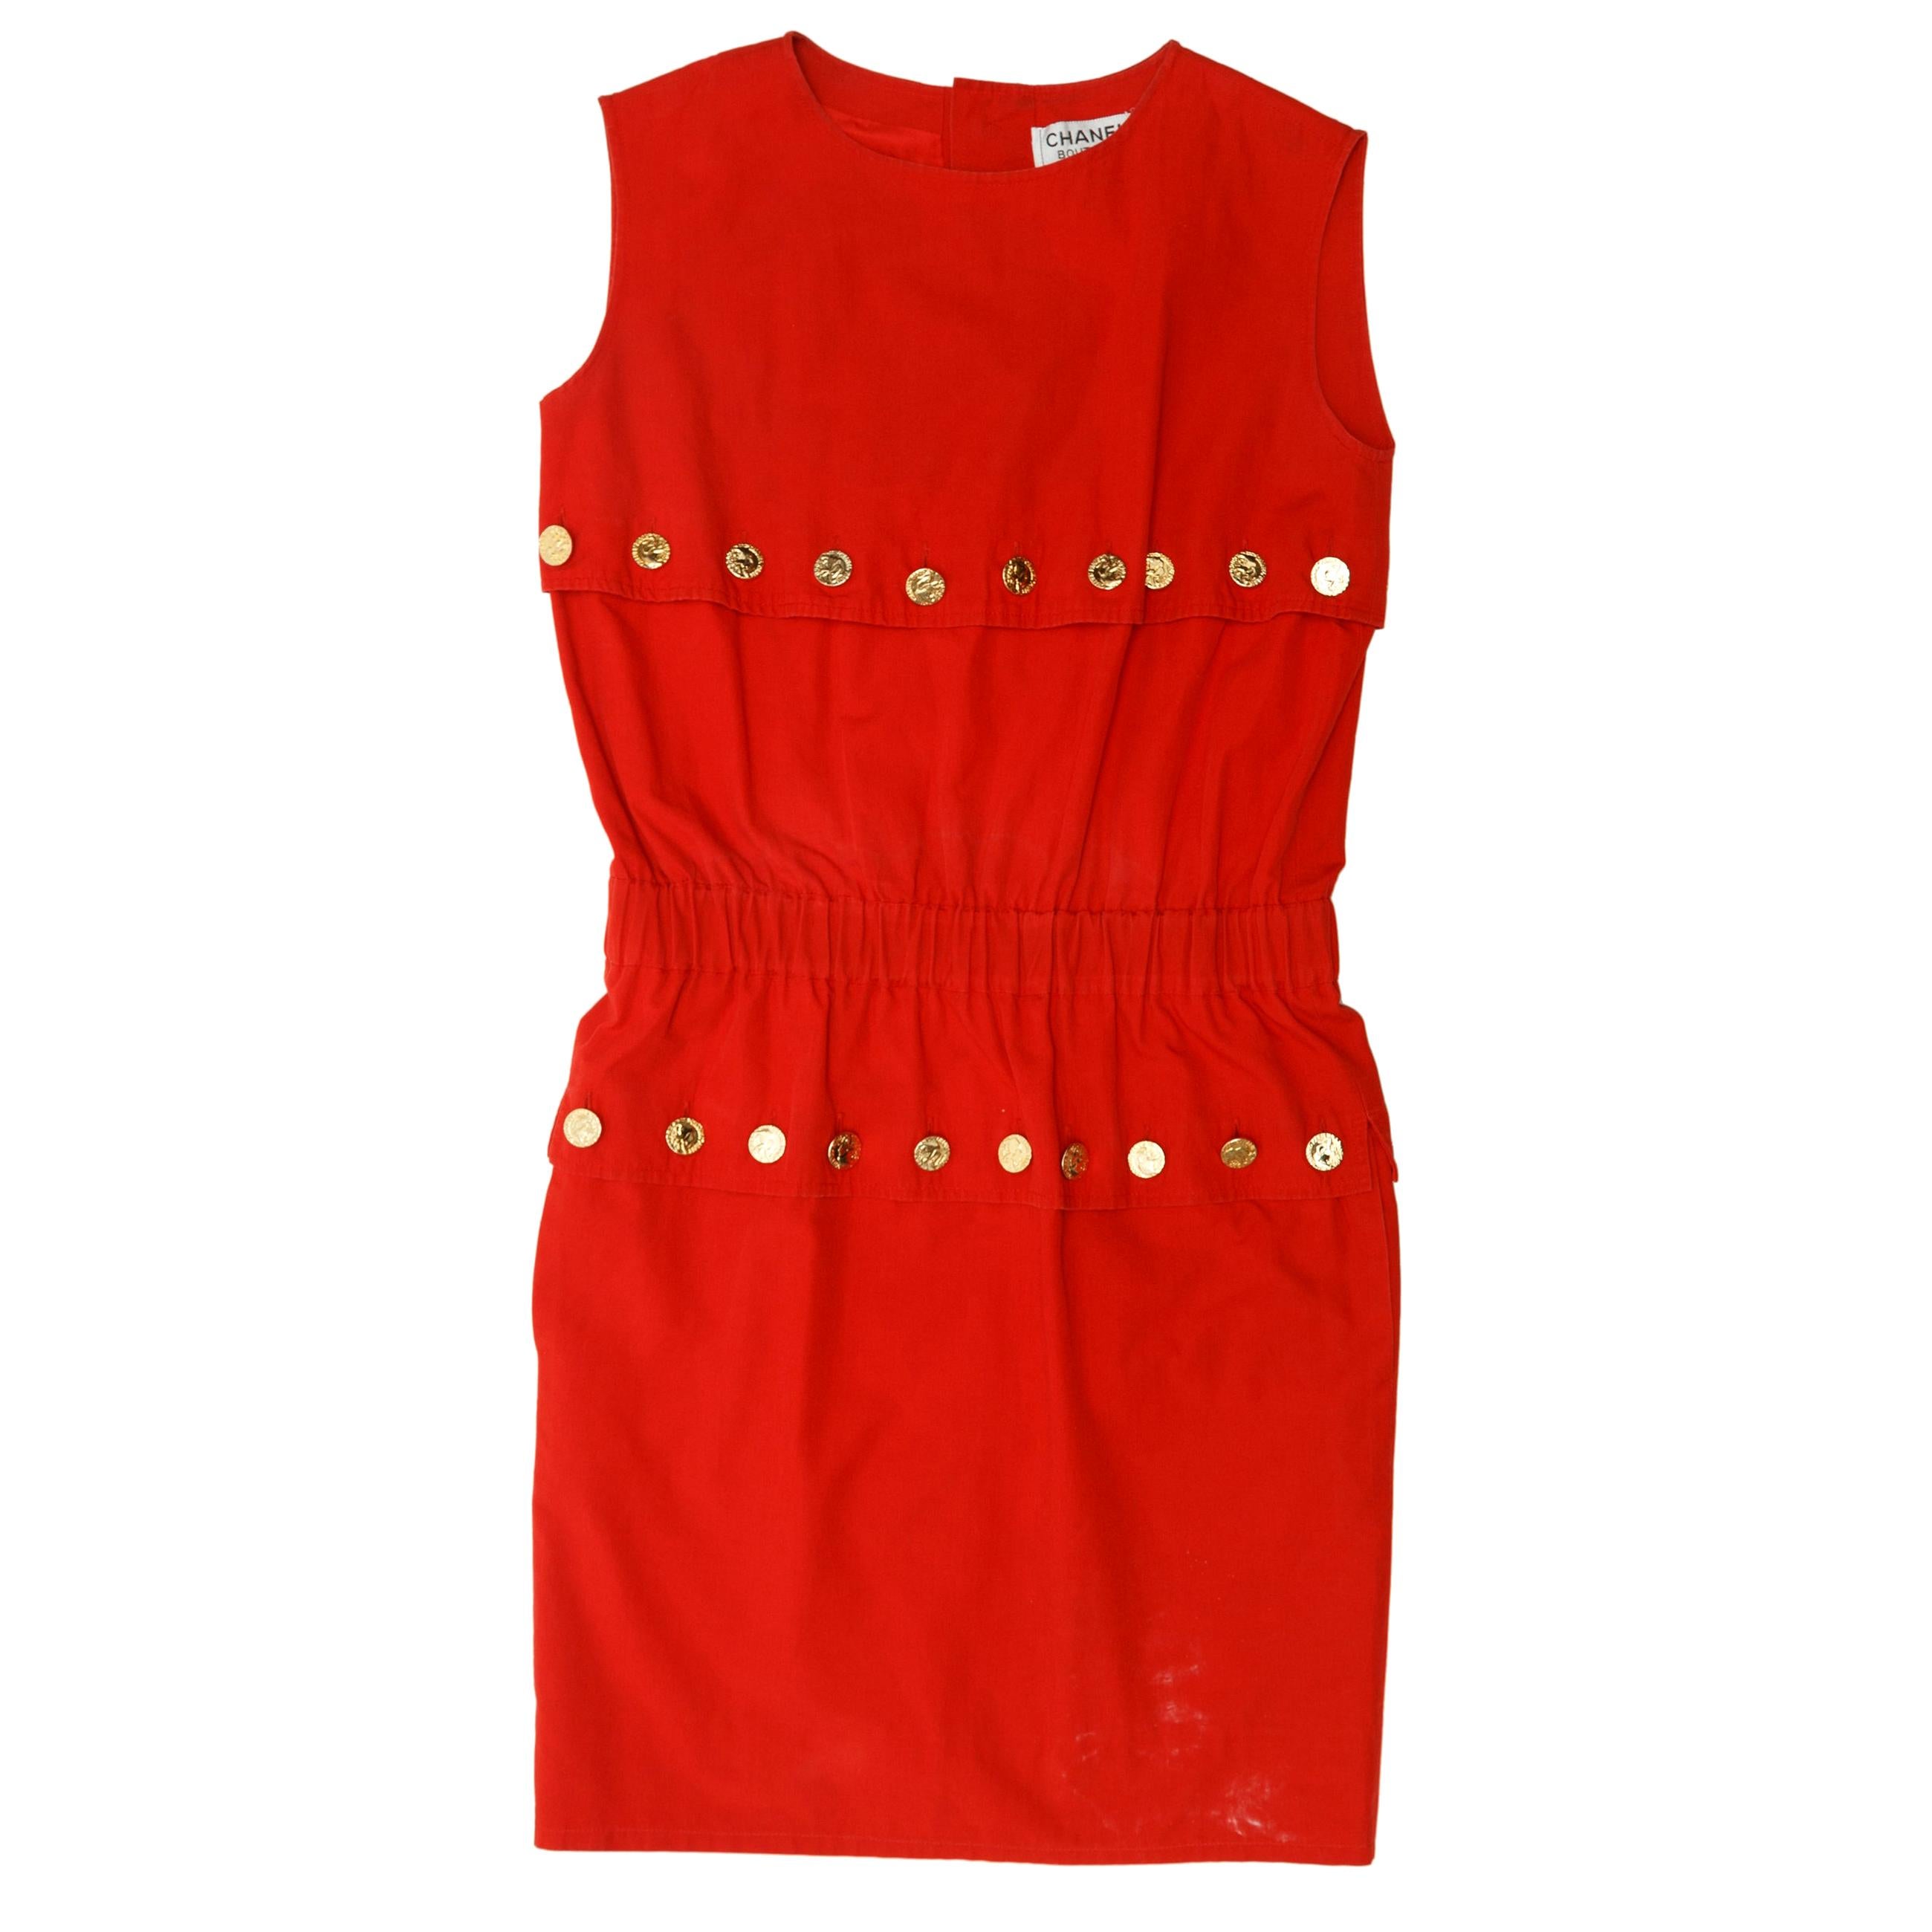 Chanel Boutique Red Sleeveless Button-Accented Dress